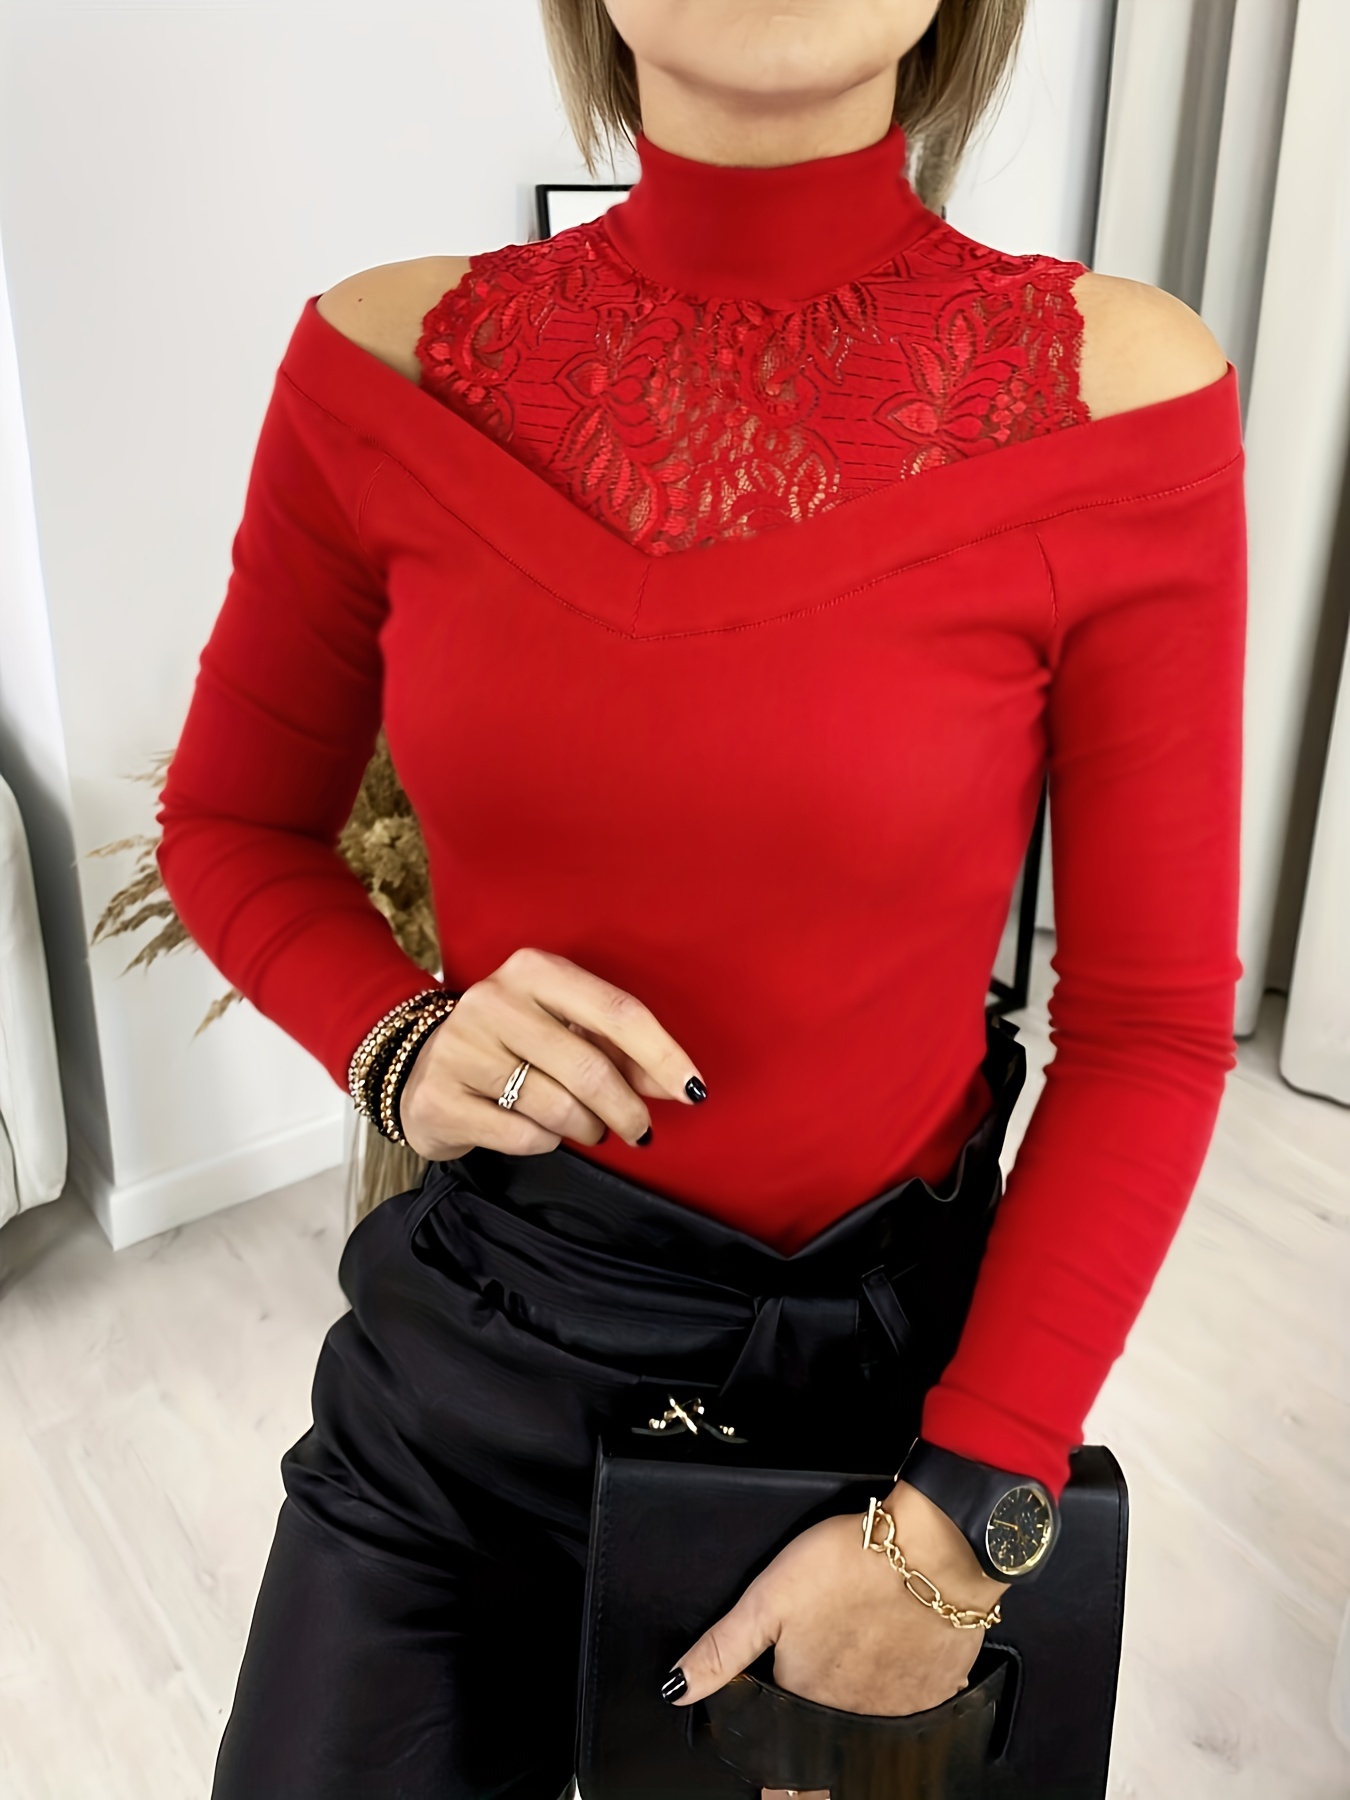 Long-Sleeve Lace Top with Mock Neckline, Regular